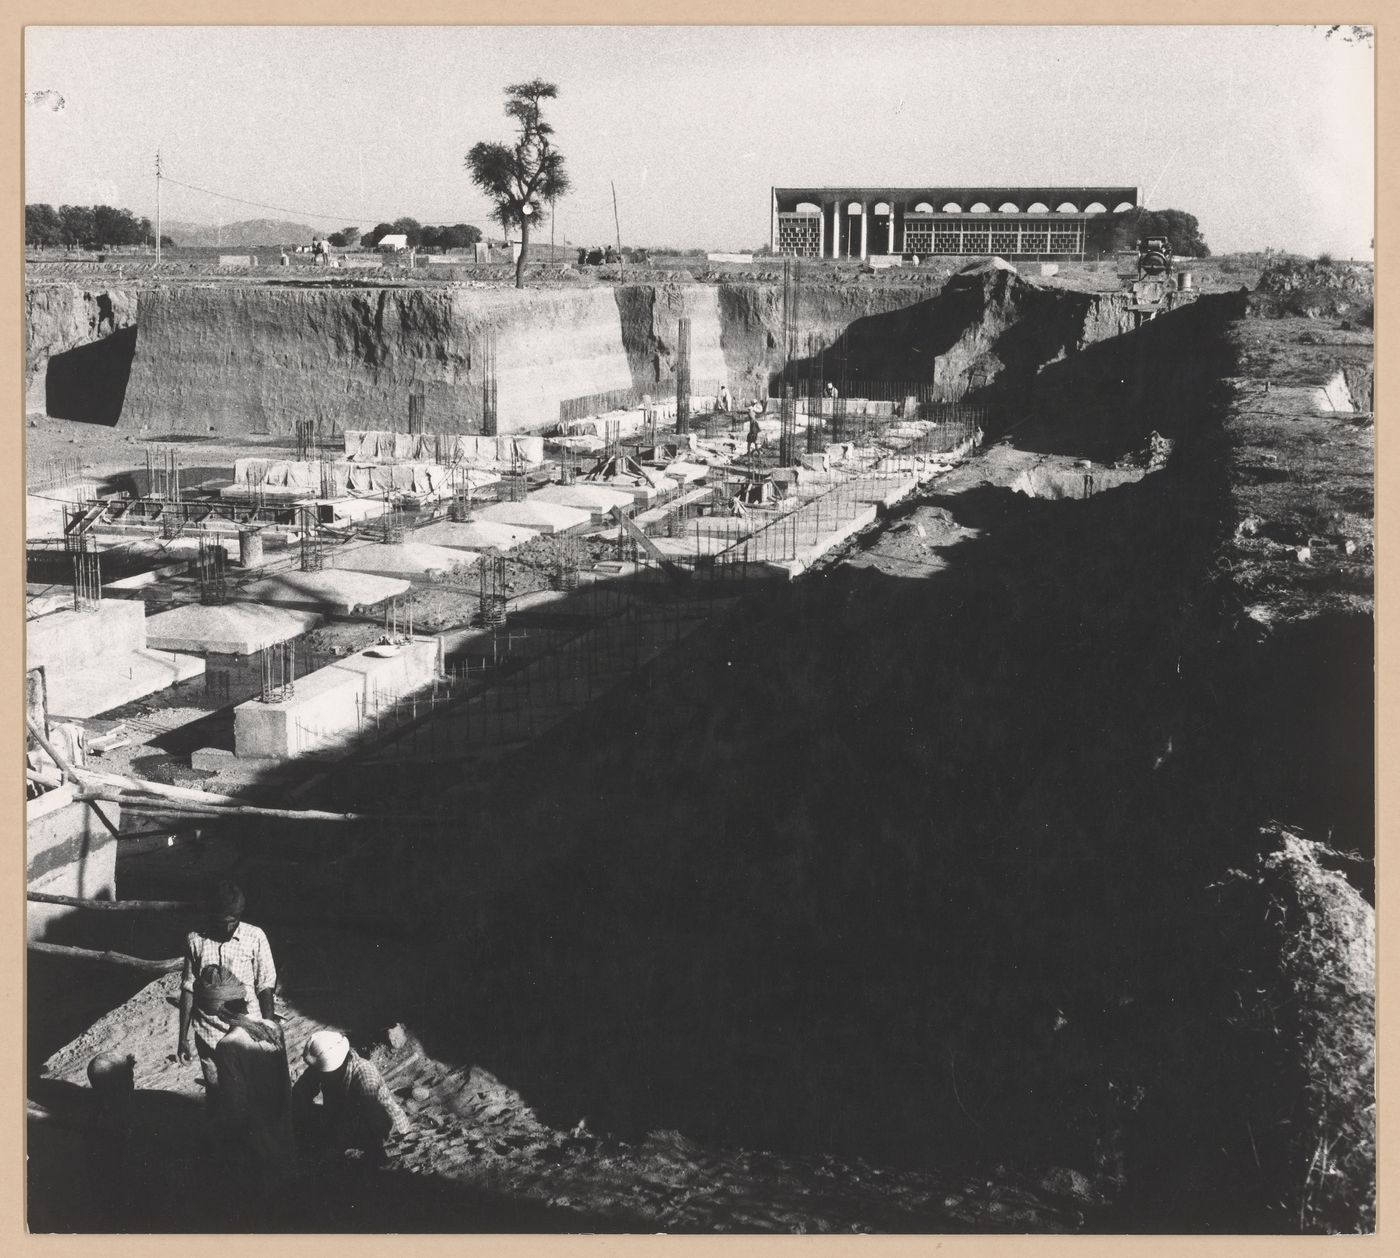 View of Palace of Assembly under construction with the High Court in the background, Chandigarh, India